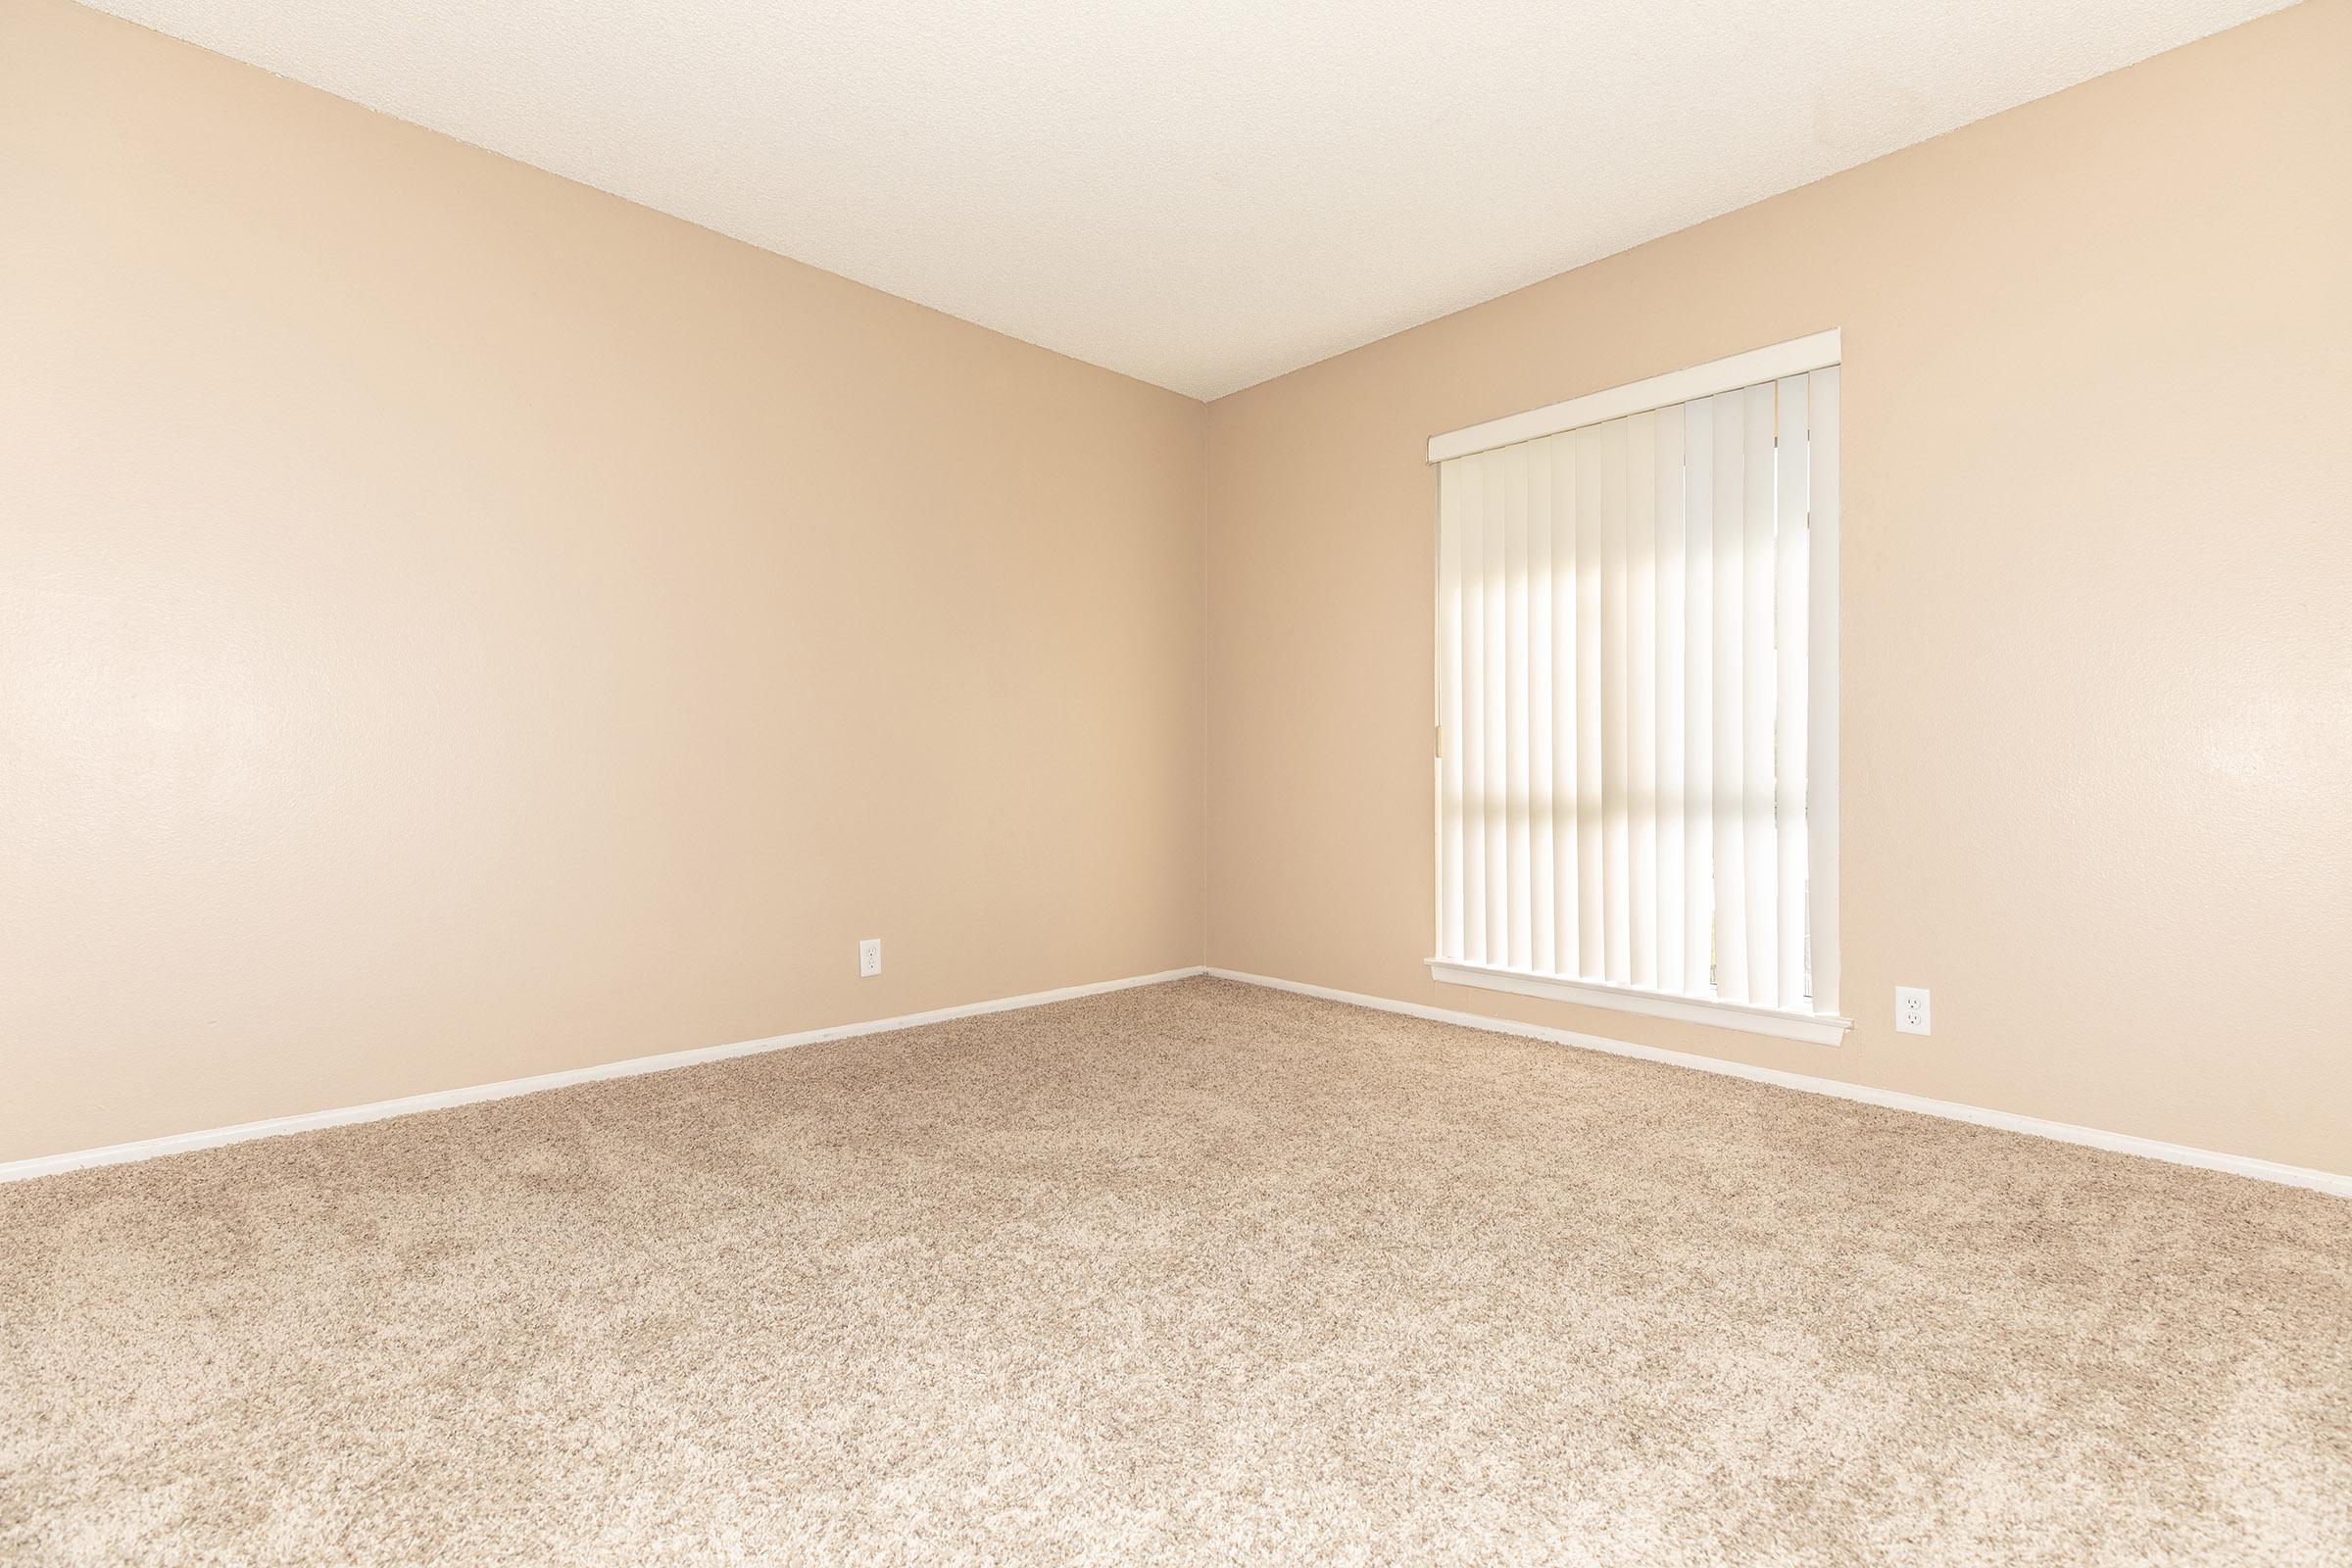 Unfurnished carpeted bedroom with window blinds